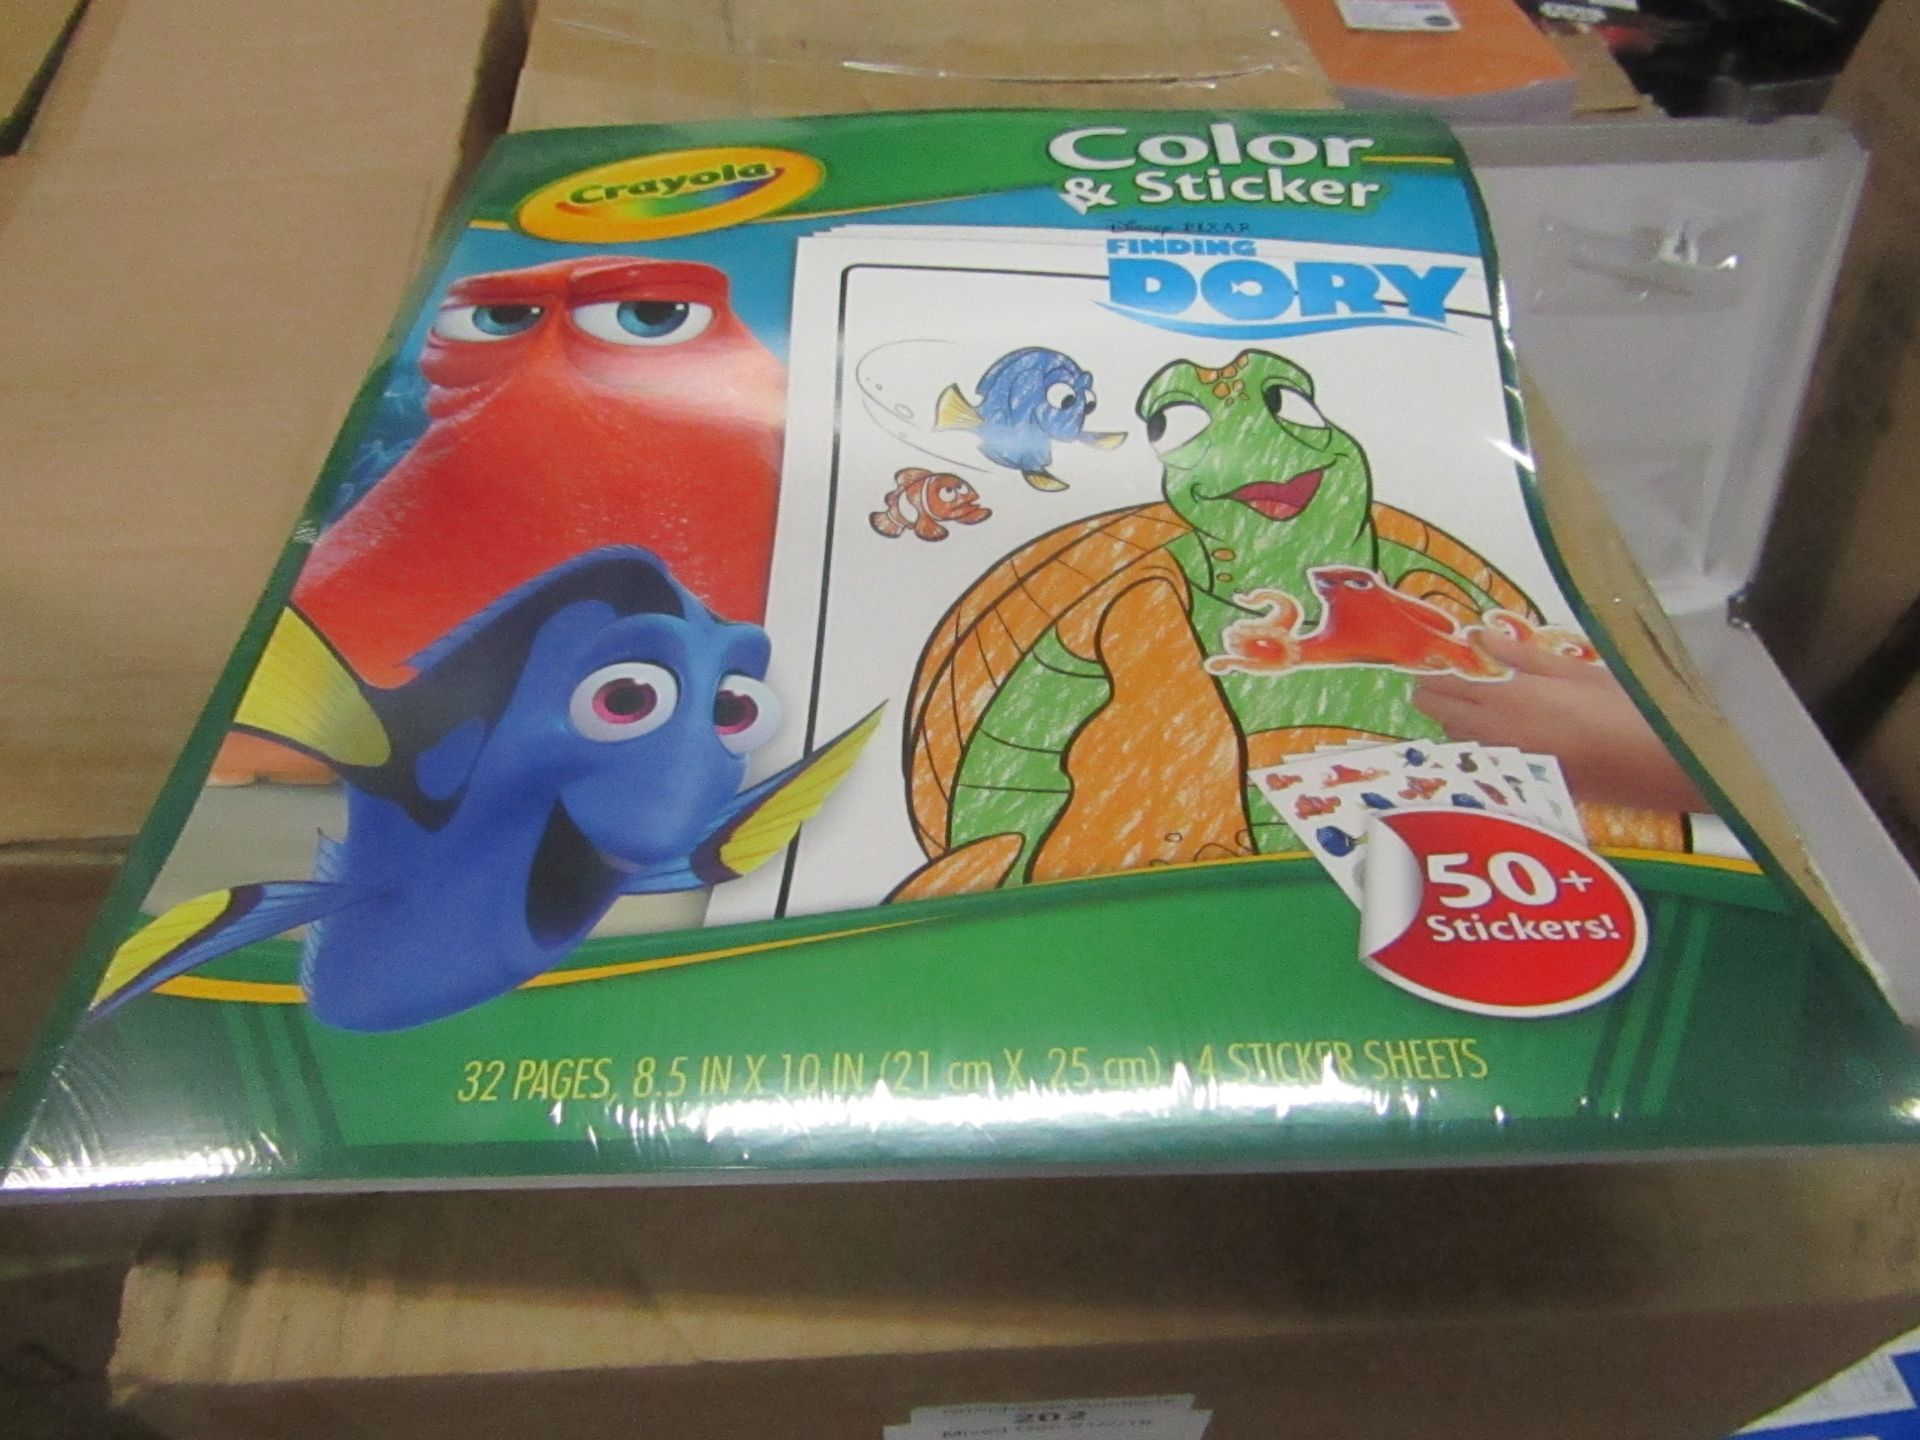 Box of 18x Crayola Colour and Sticker Finding Dory books, still sealed